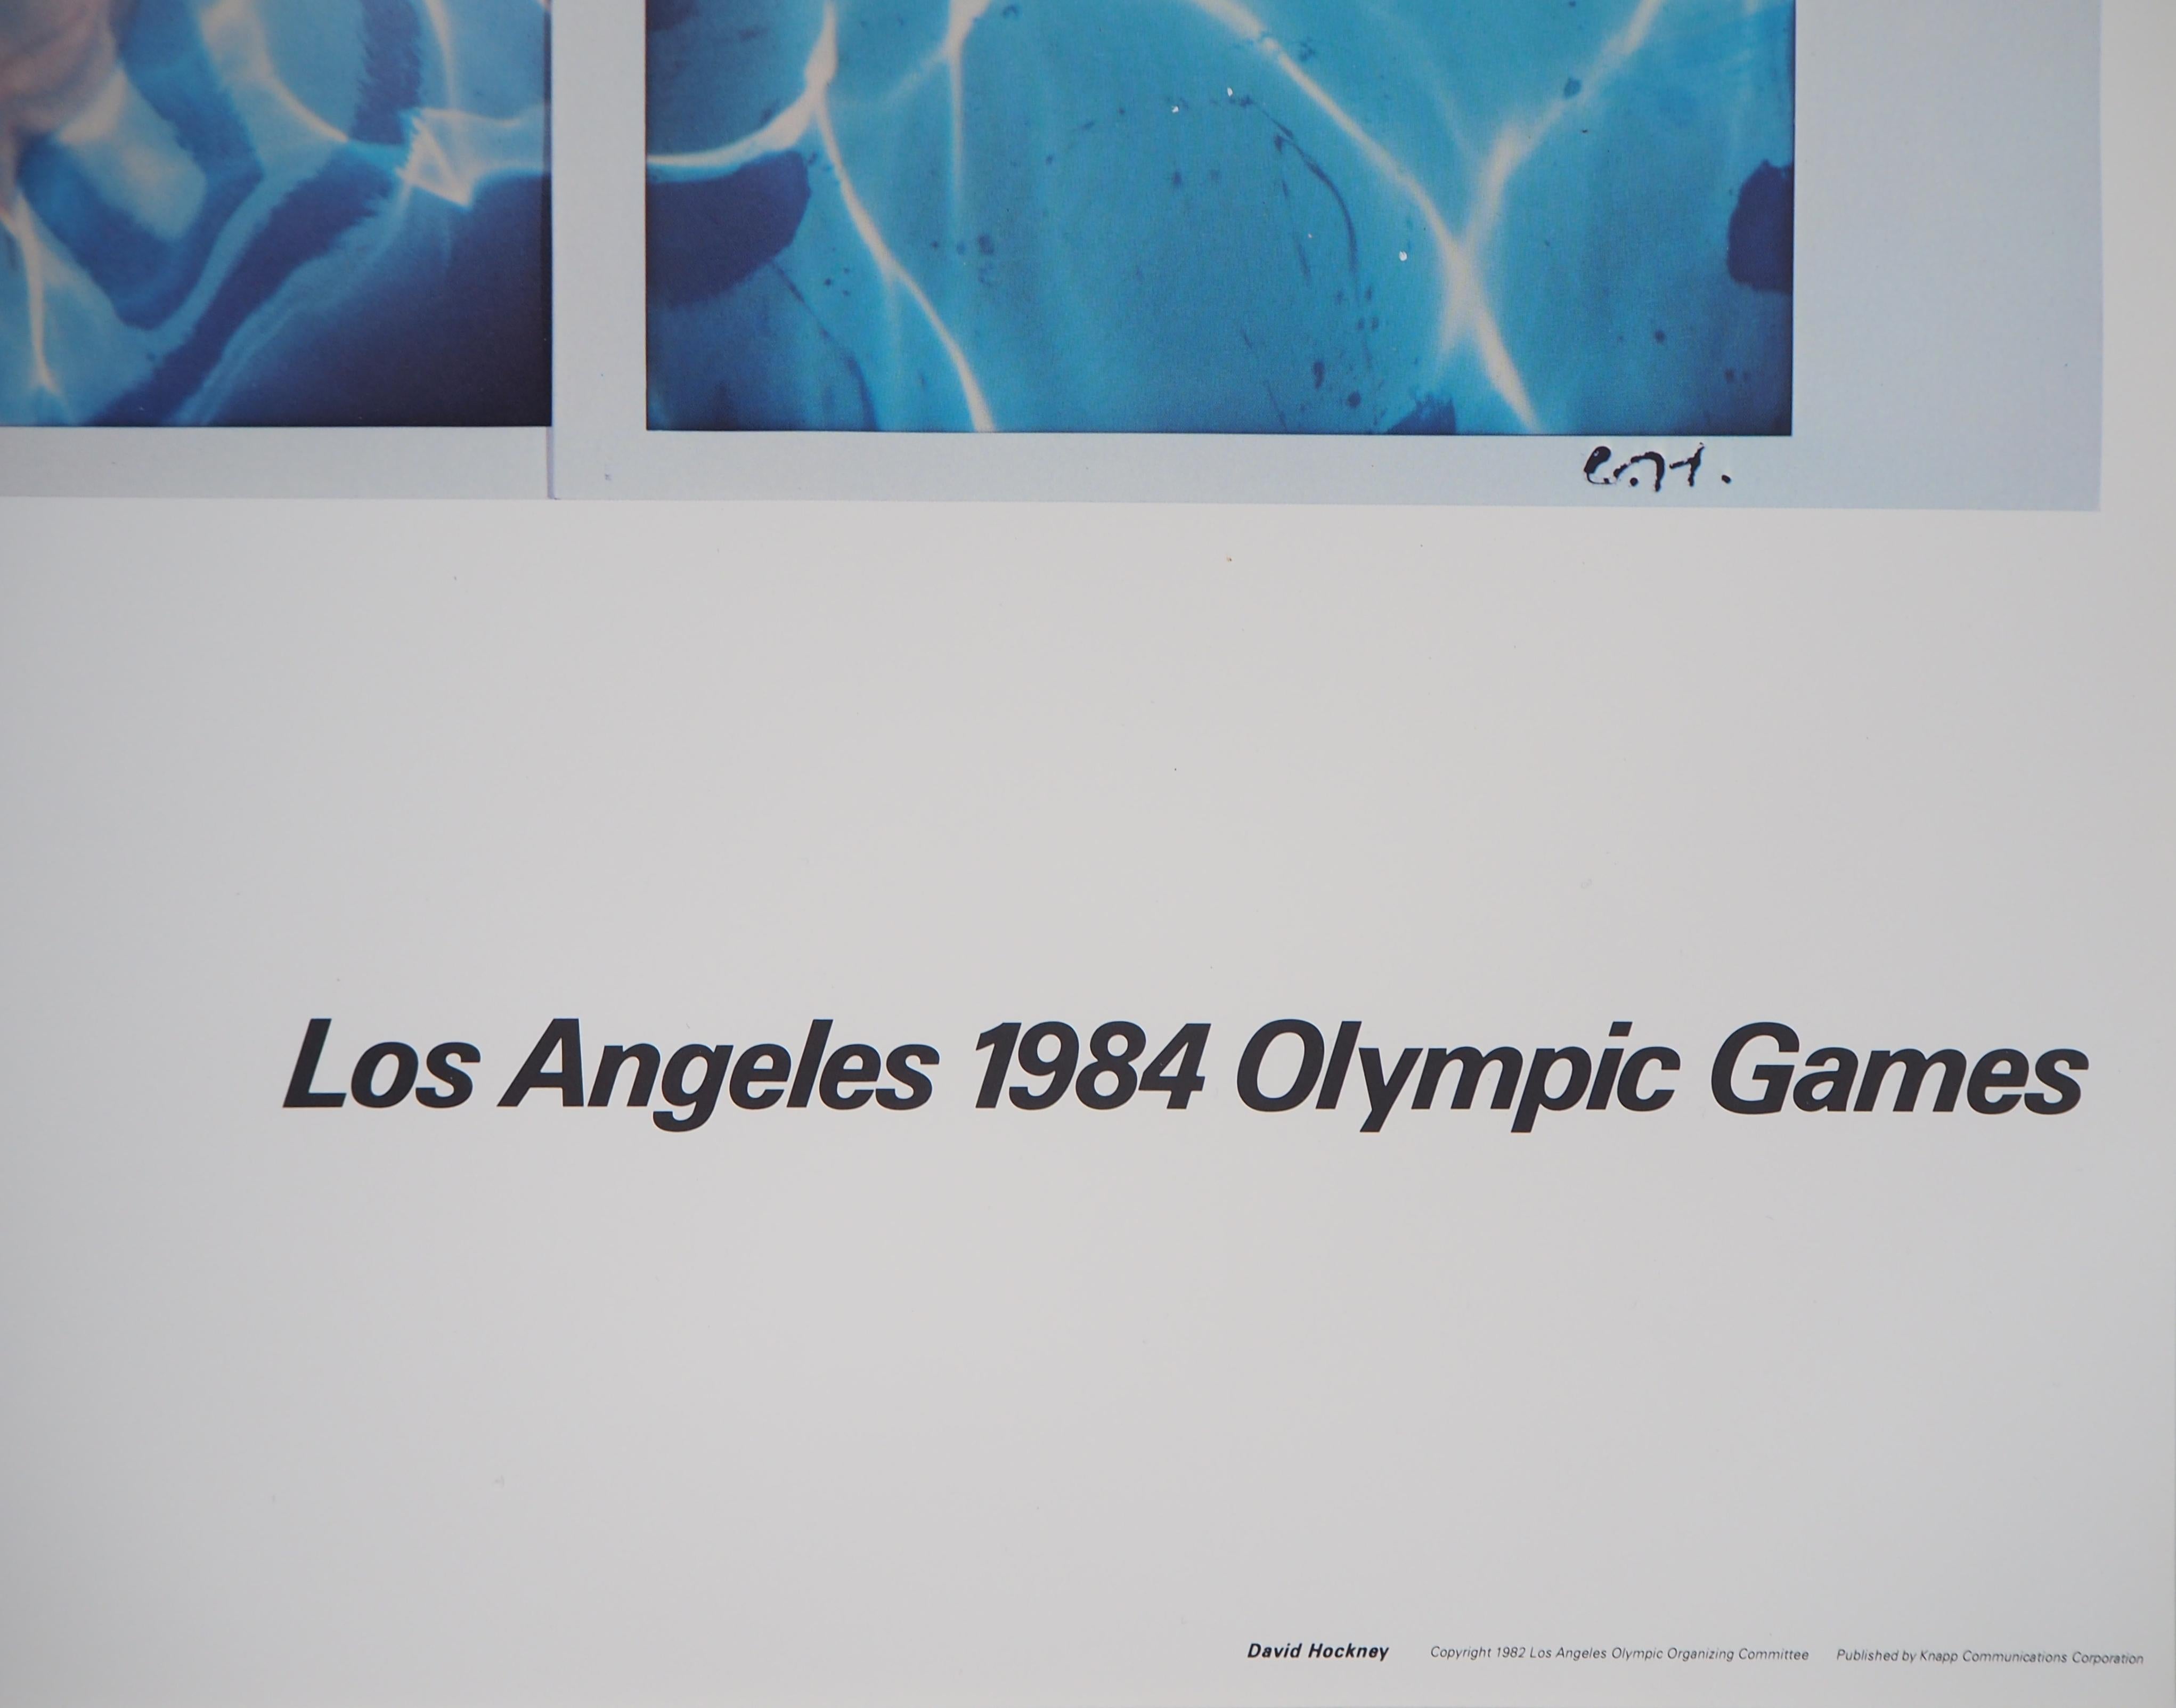 Swimmer / Pool Diver - Offset Lithograph (Olympic Games, Los Angeles 1984) For Sale 1